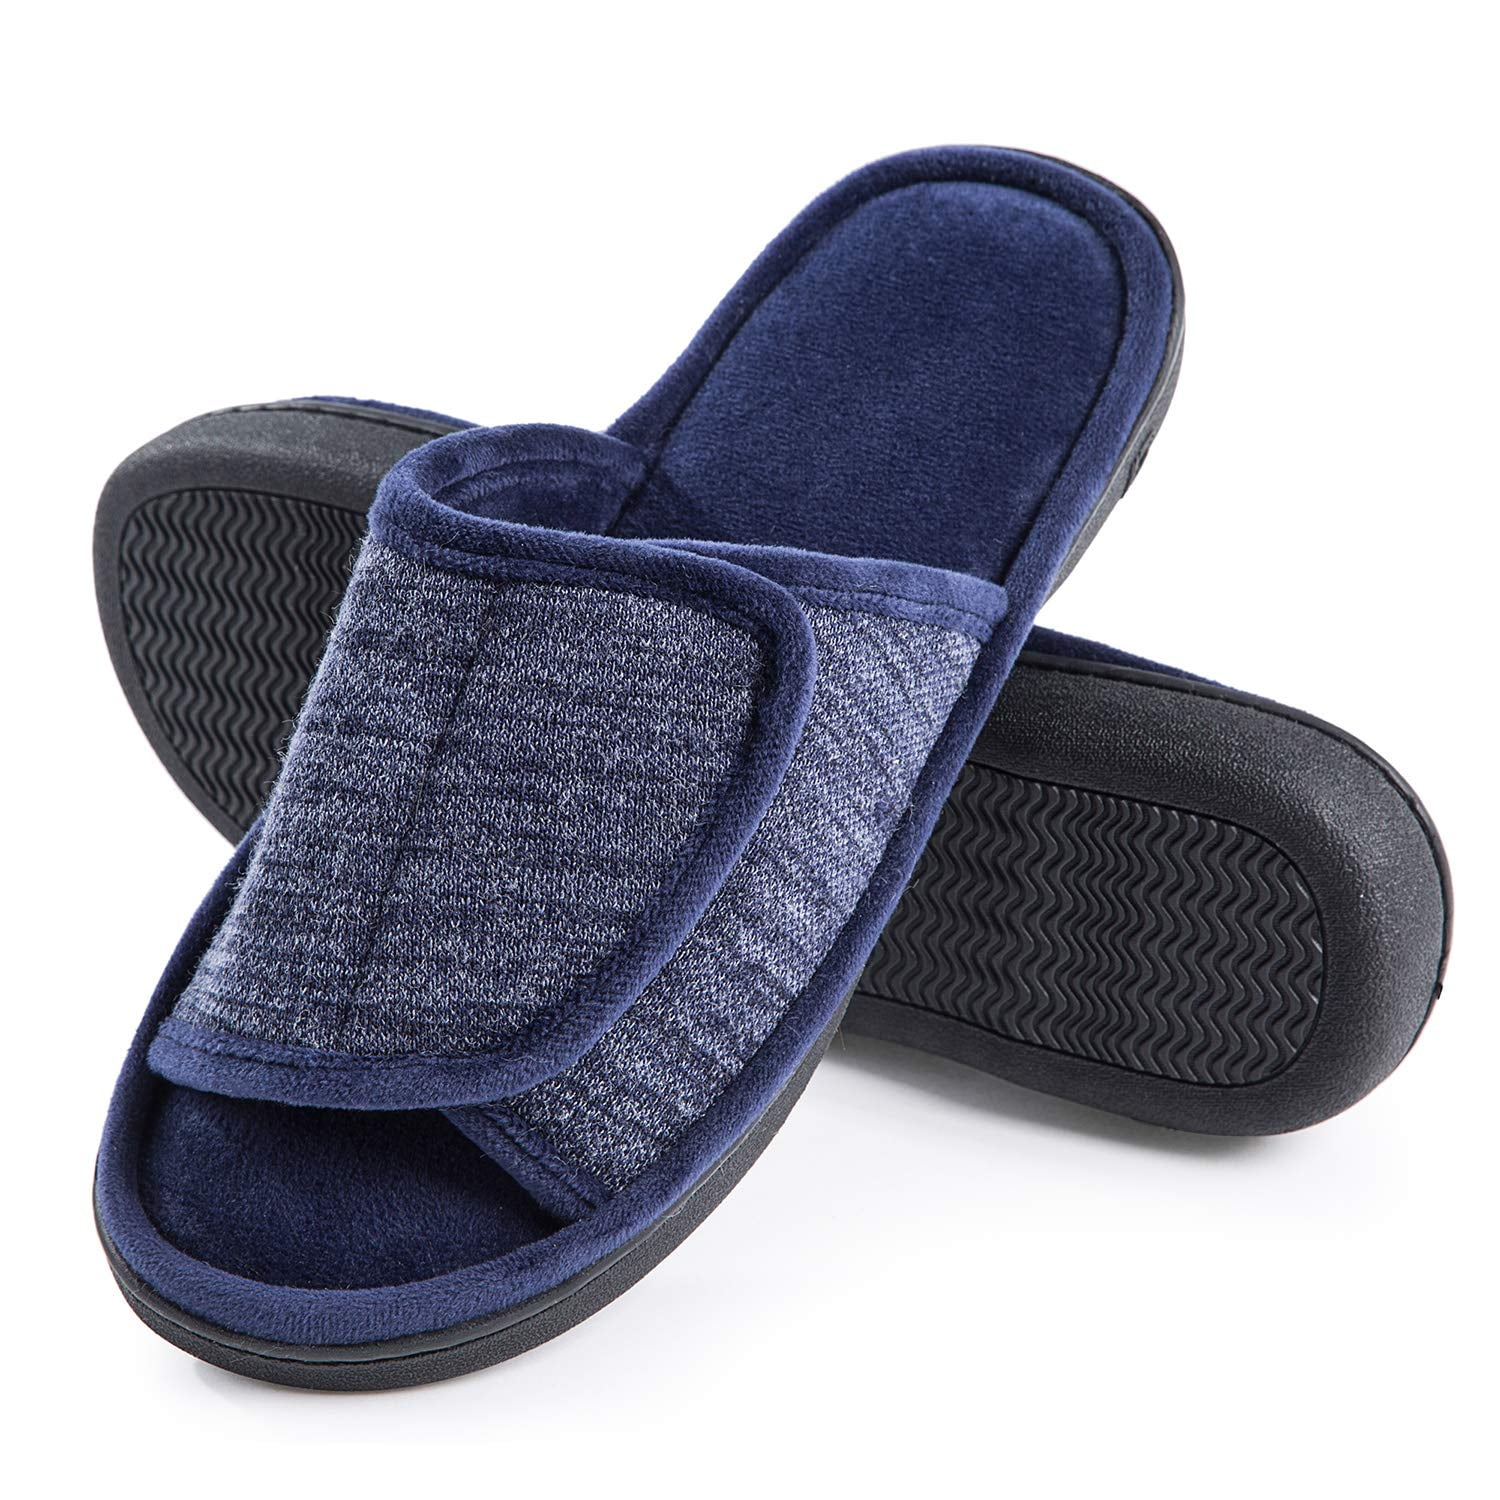 EverFoams Mens Comfort Memory Foam Slippers Soft Tweed Plush House Shoes with Stretchable Band